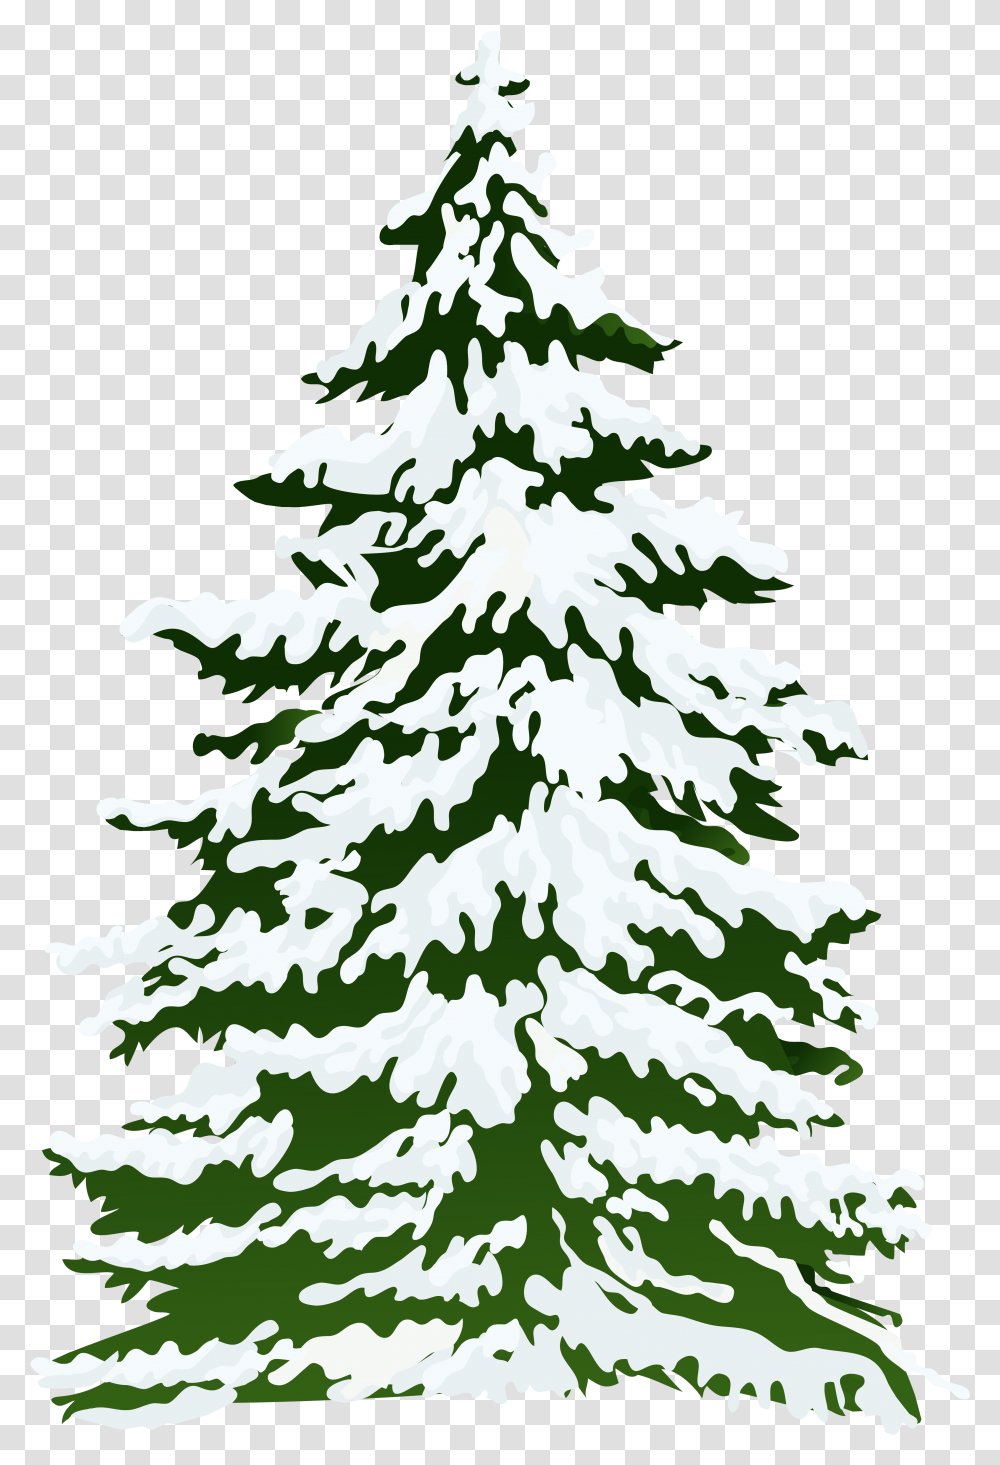 Snowy Tree Branch Clip Art Clipart Free Download Snow Pine Tree Clipart, Plant, Ornament, Christmas Tree, Fir Transparent Png